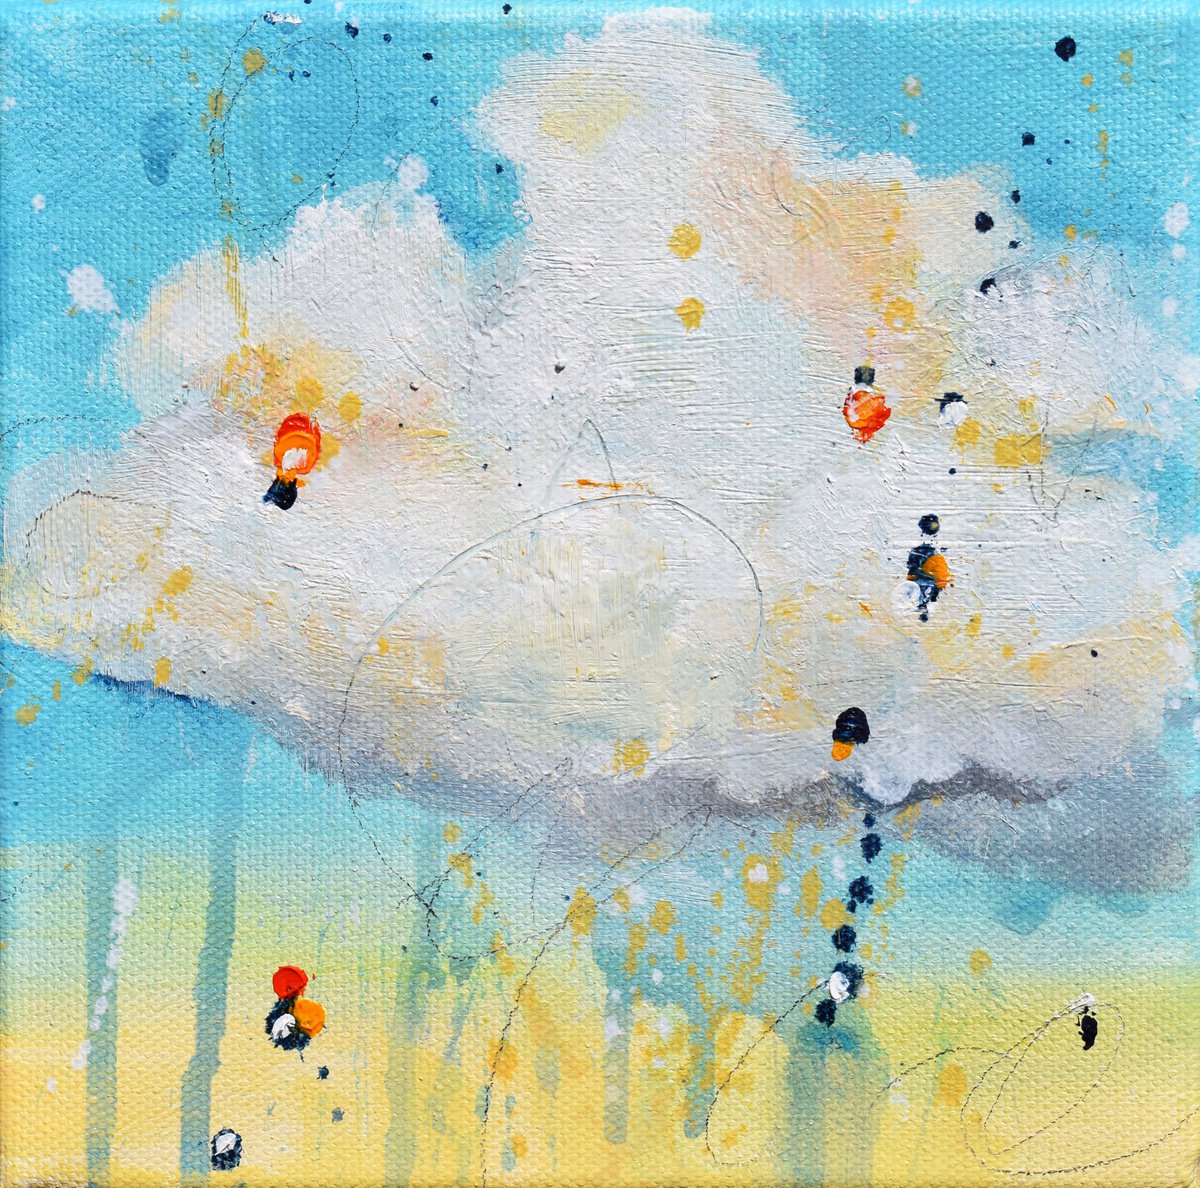 Noonday Dreams - 6 x 6 IN / 15 x 15 CM - Oil Painting on Canvas, Ready to Hang by Cynthia Ligeros Abstract Artist